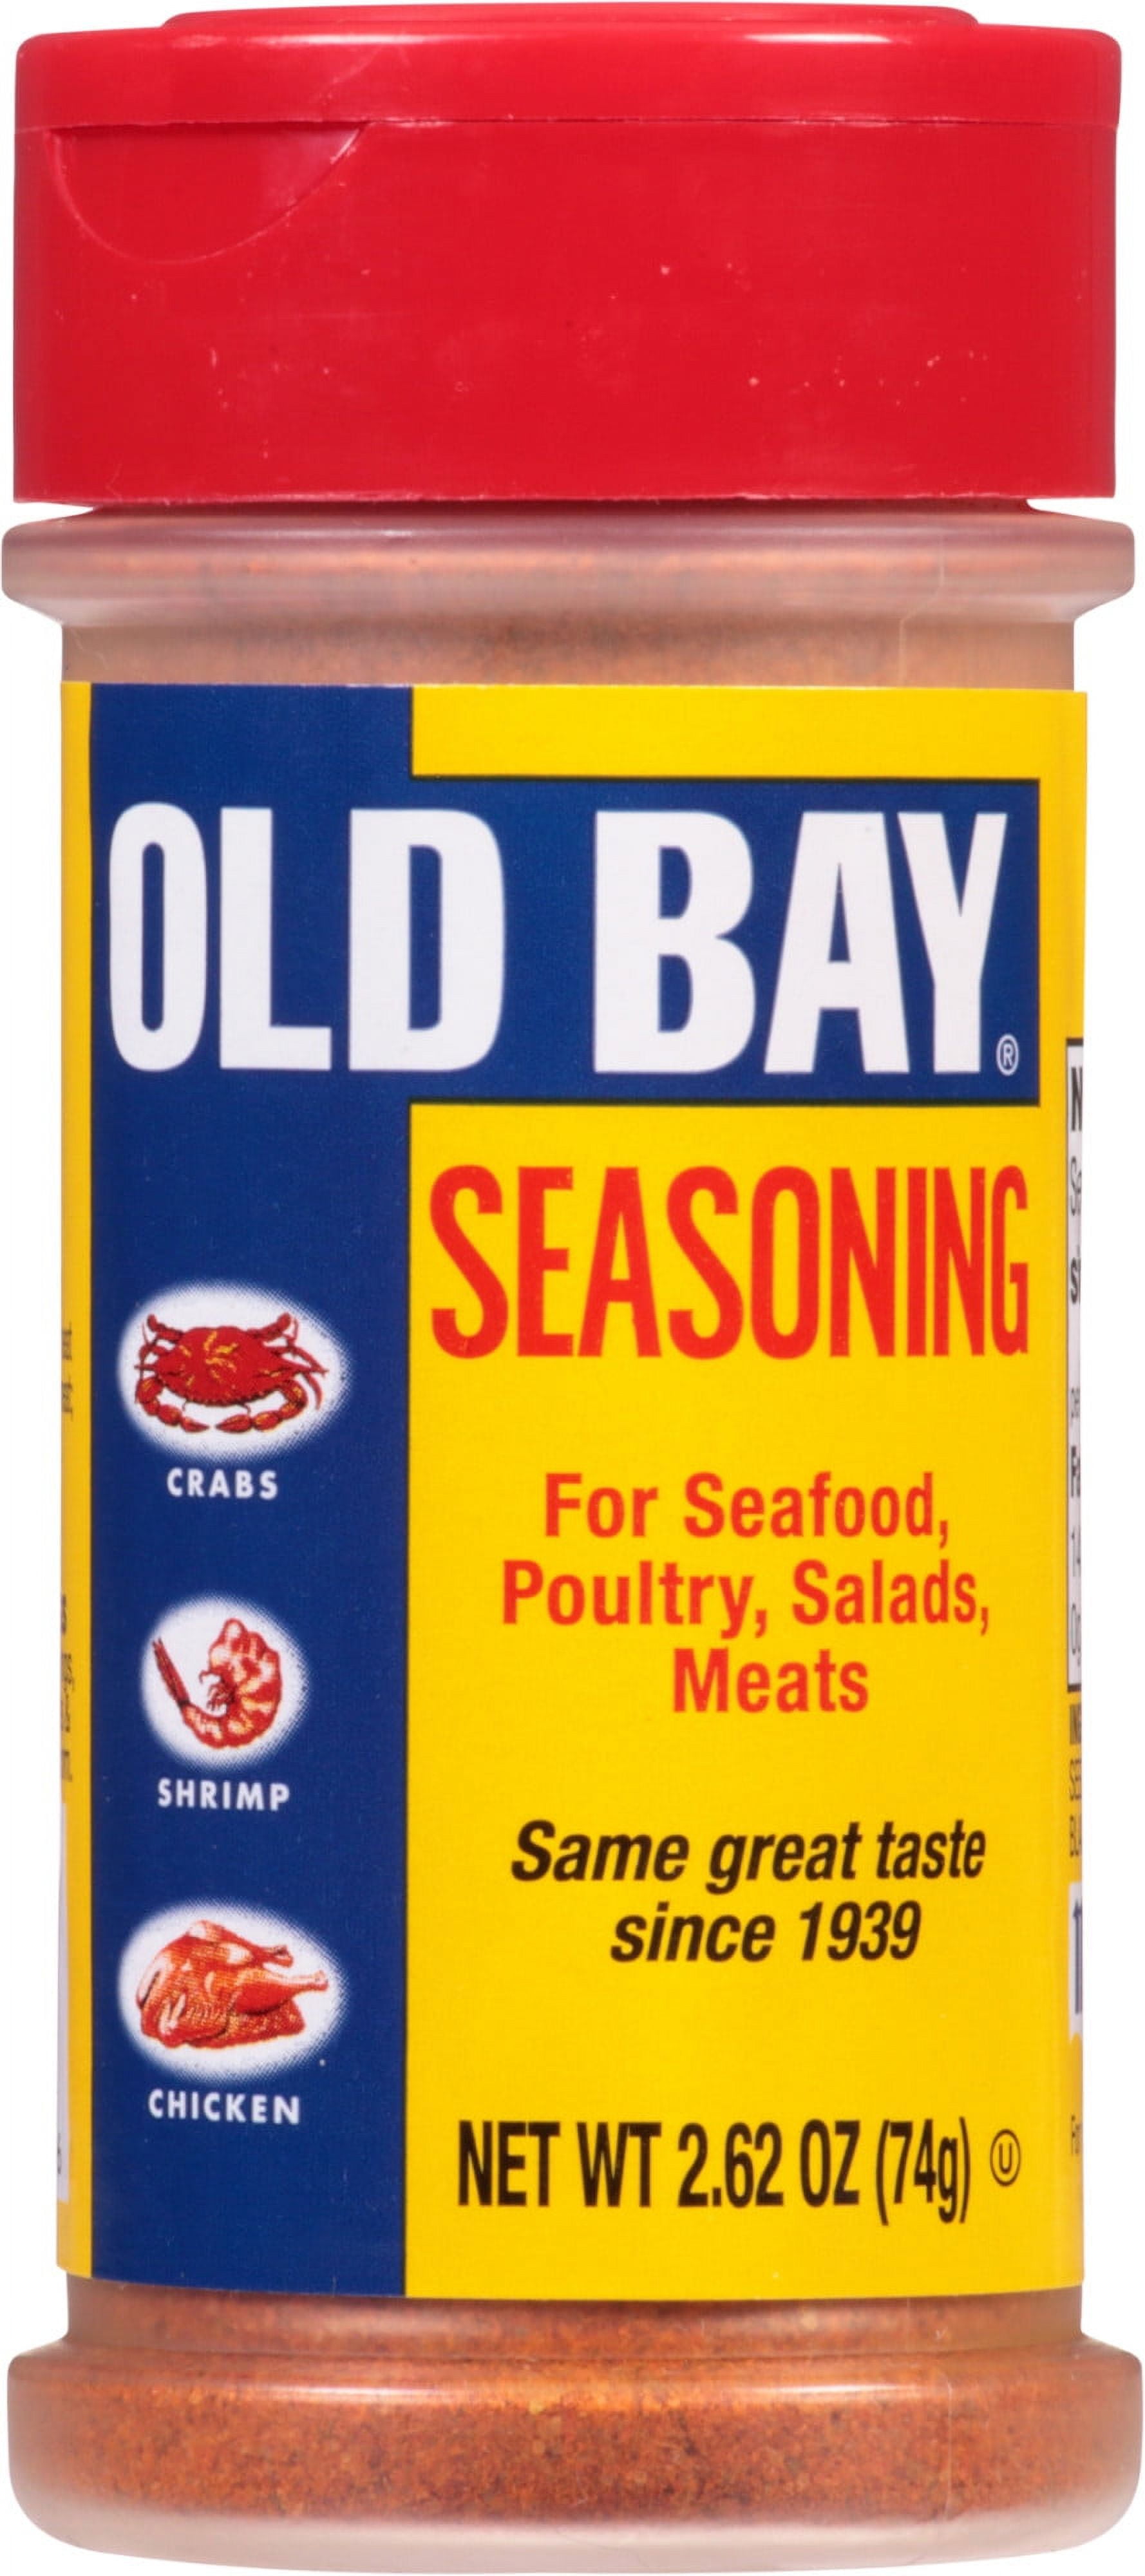 Fish Seasoning: to Add Up A Great Taste